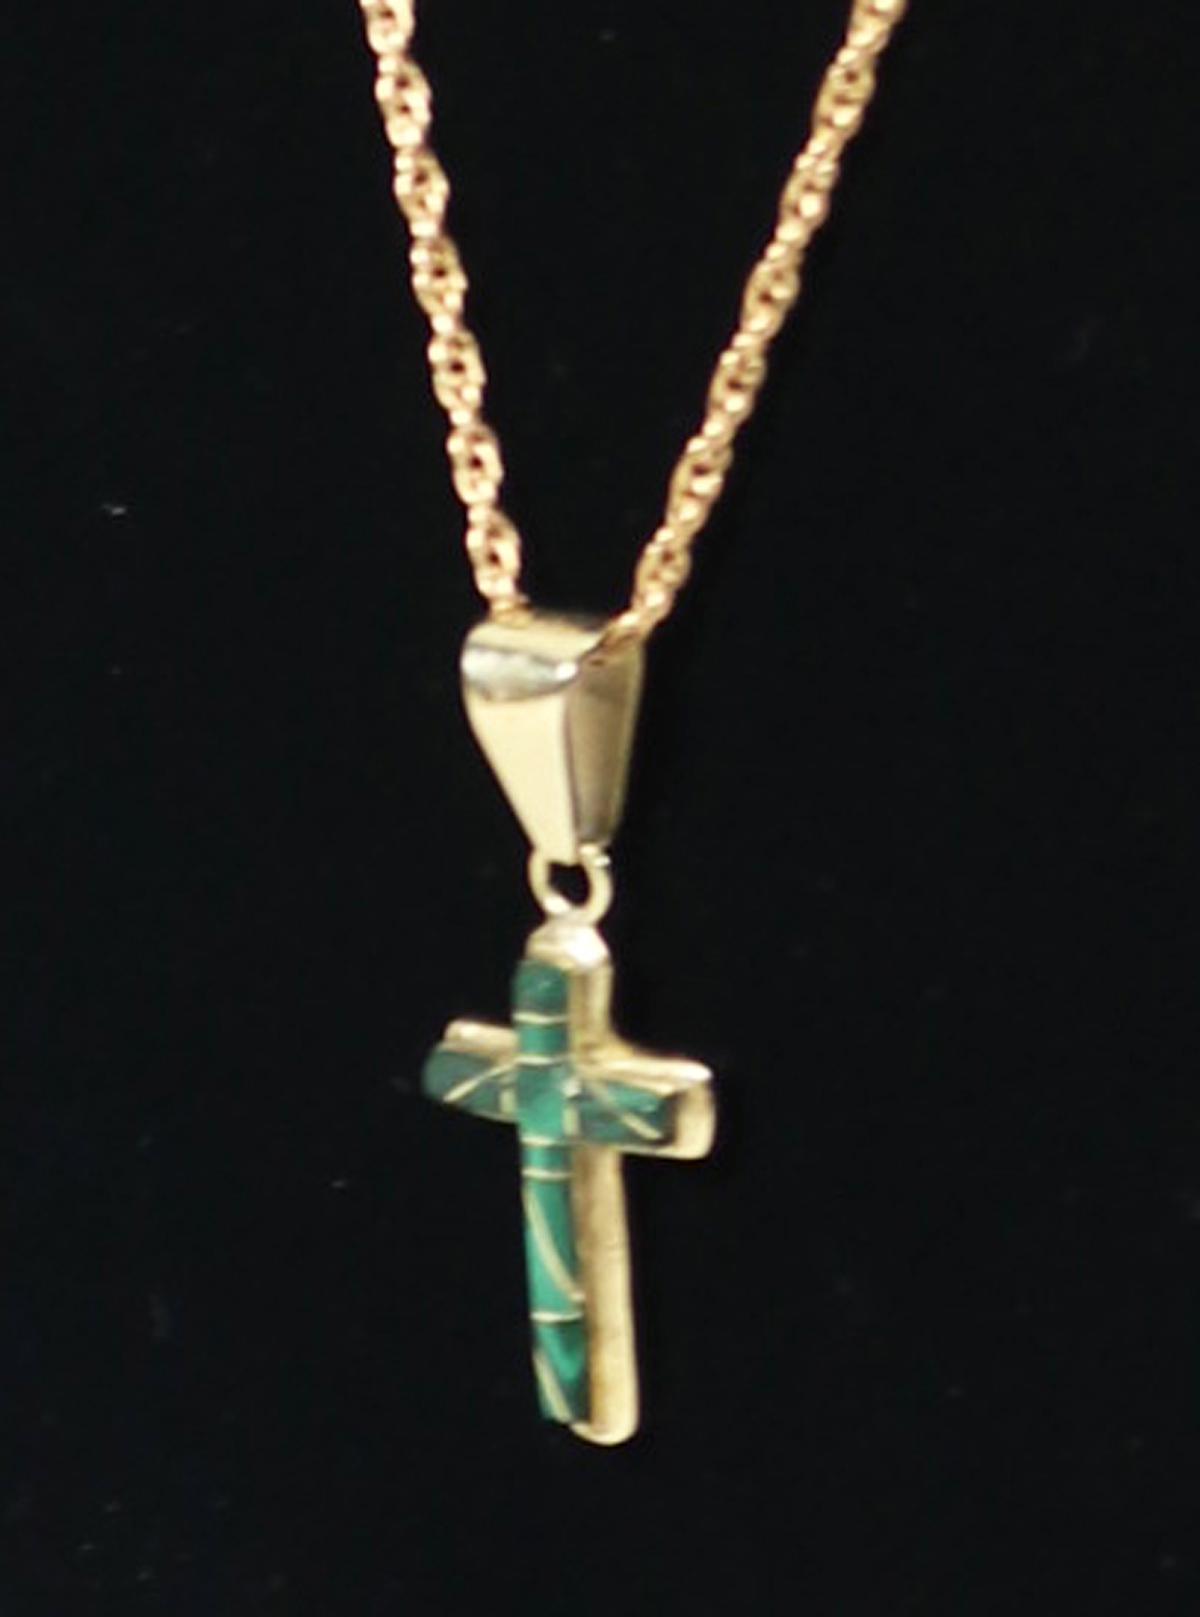 14K Necklace & Cross Pendant w/ Green Colored Stones - 7.2 Grams